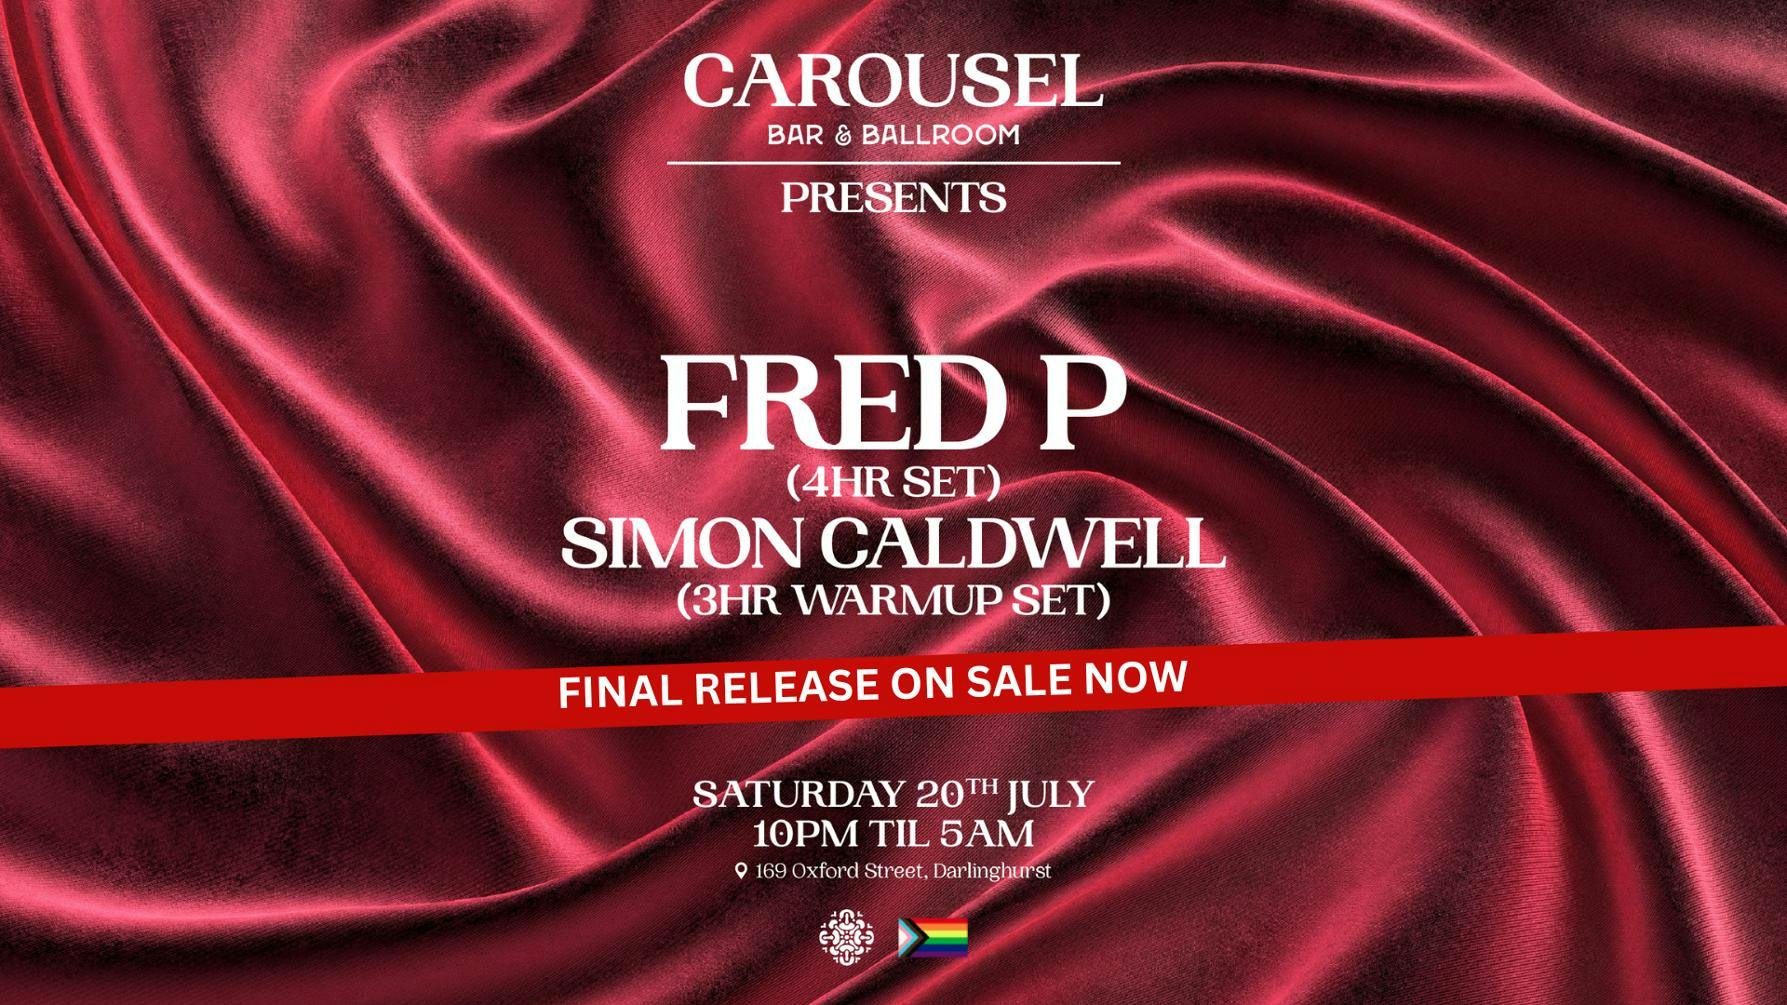 Carousel Presents - Fred P (4 Hour Set) - Saturday 20th July